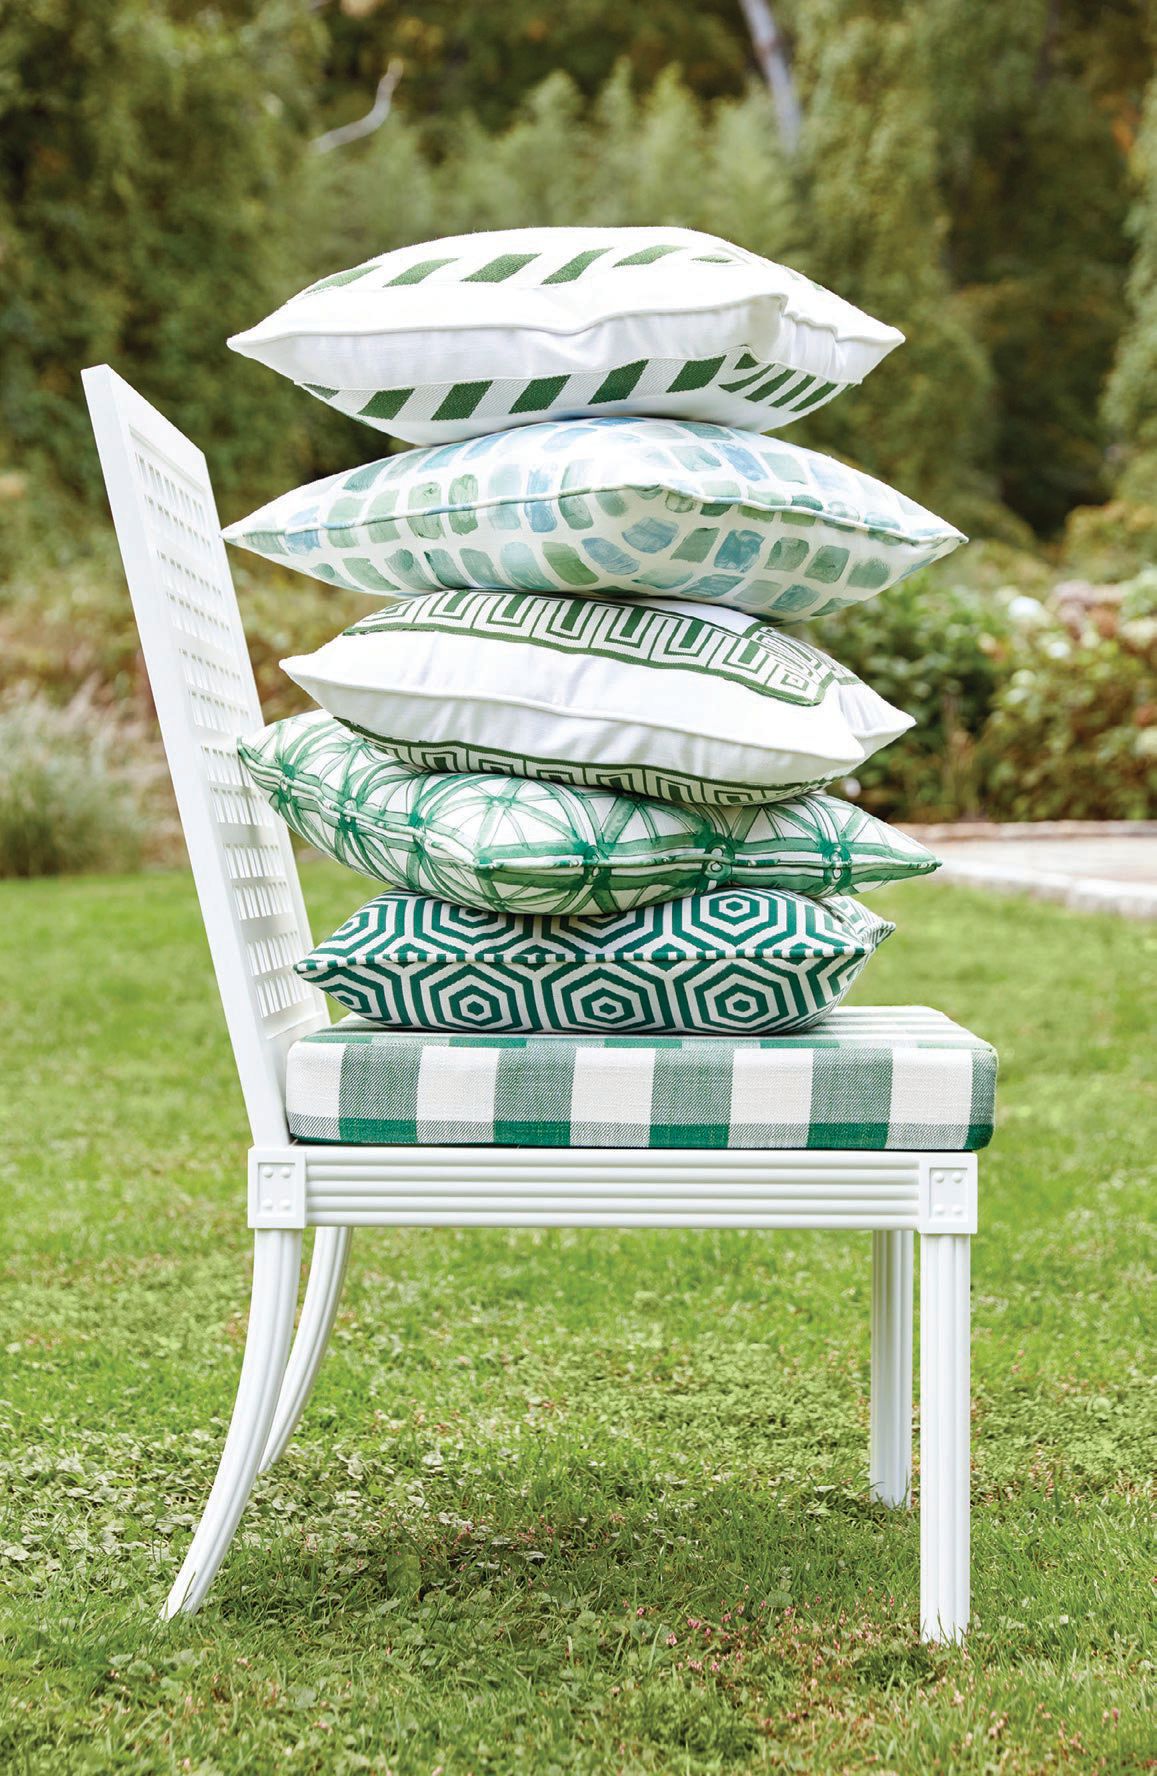 The Mary McDonald Indoor/Outdoor Collection for Schumacher. PHOTO COURTESY OF BRAND